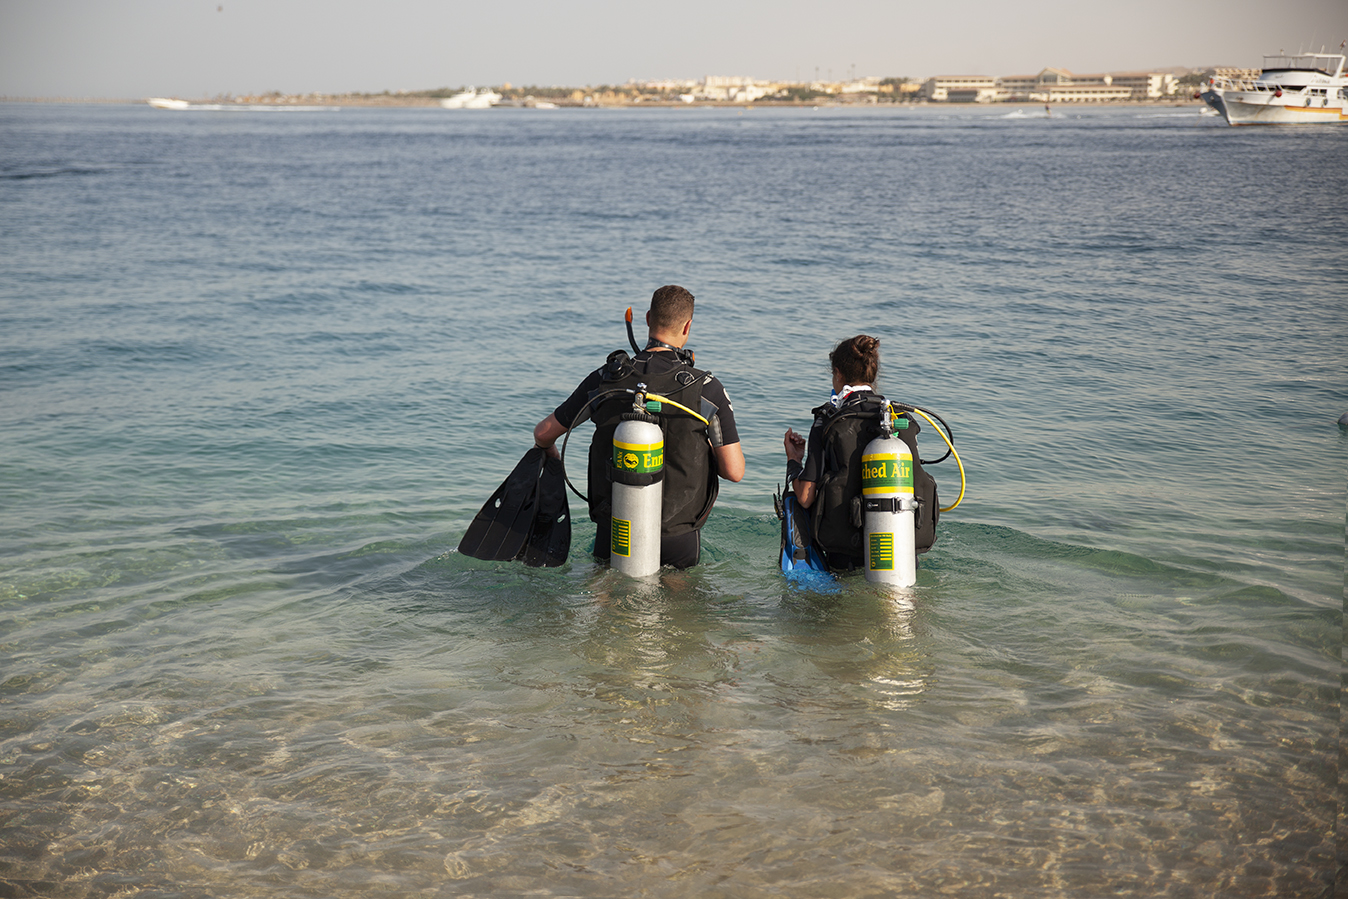 Two divers enjoying a scuba vacation and making use of the advantages of nitrox when doing multiple dives over several days